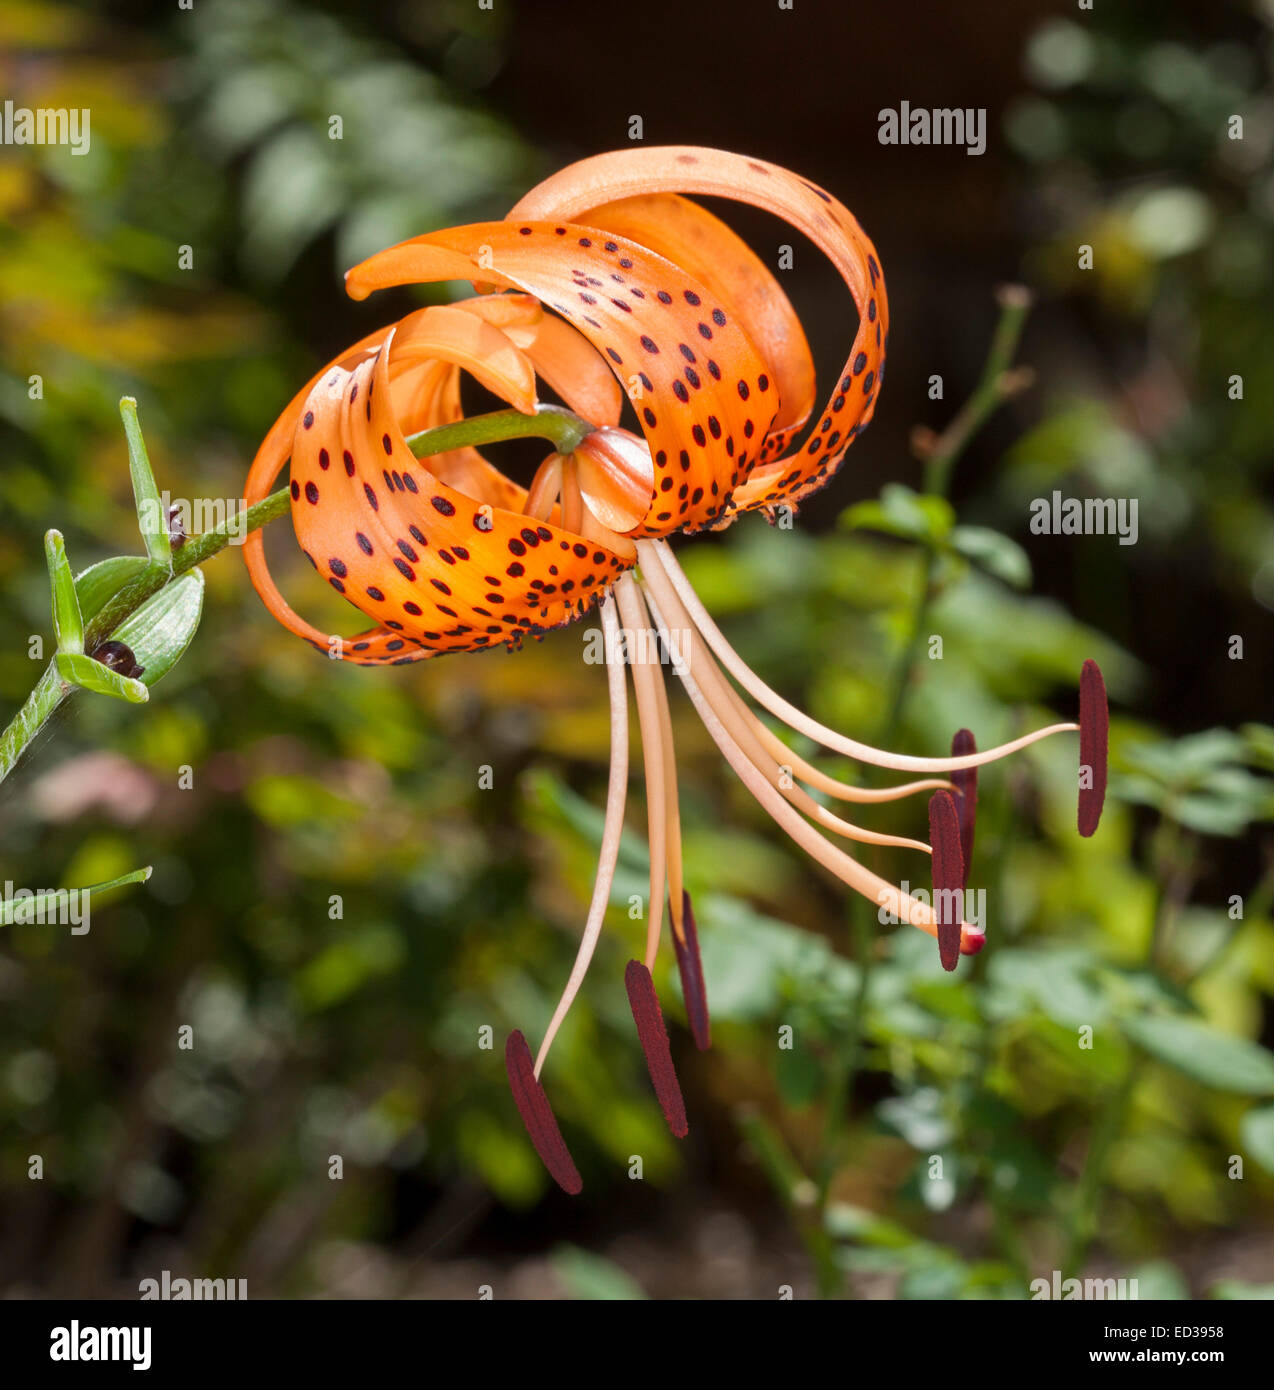 Large vivid orange flower with curved spotted petals of Lilium lancifolium syn L. tigrinum, Tiger Lily, against background of green foliage Stock Photo